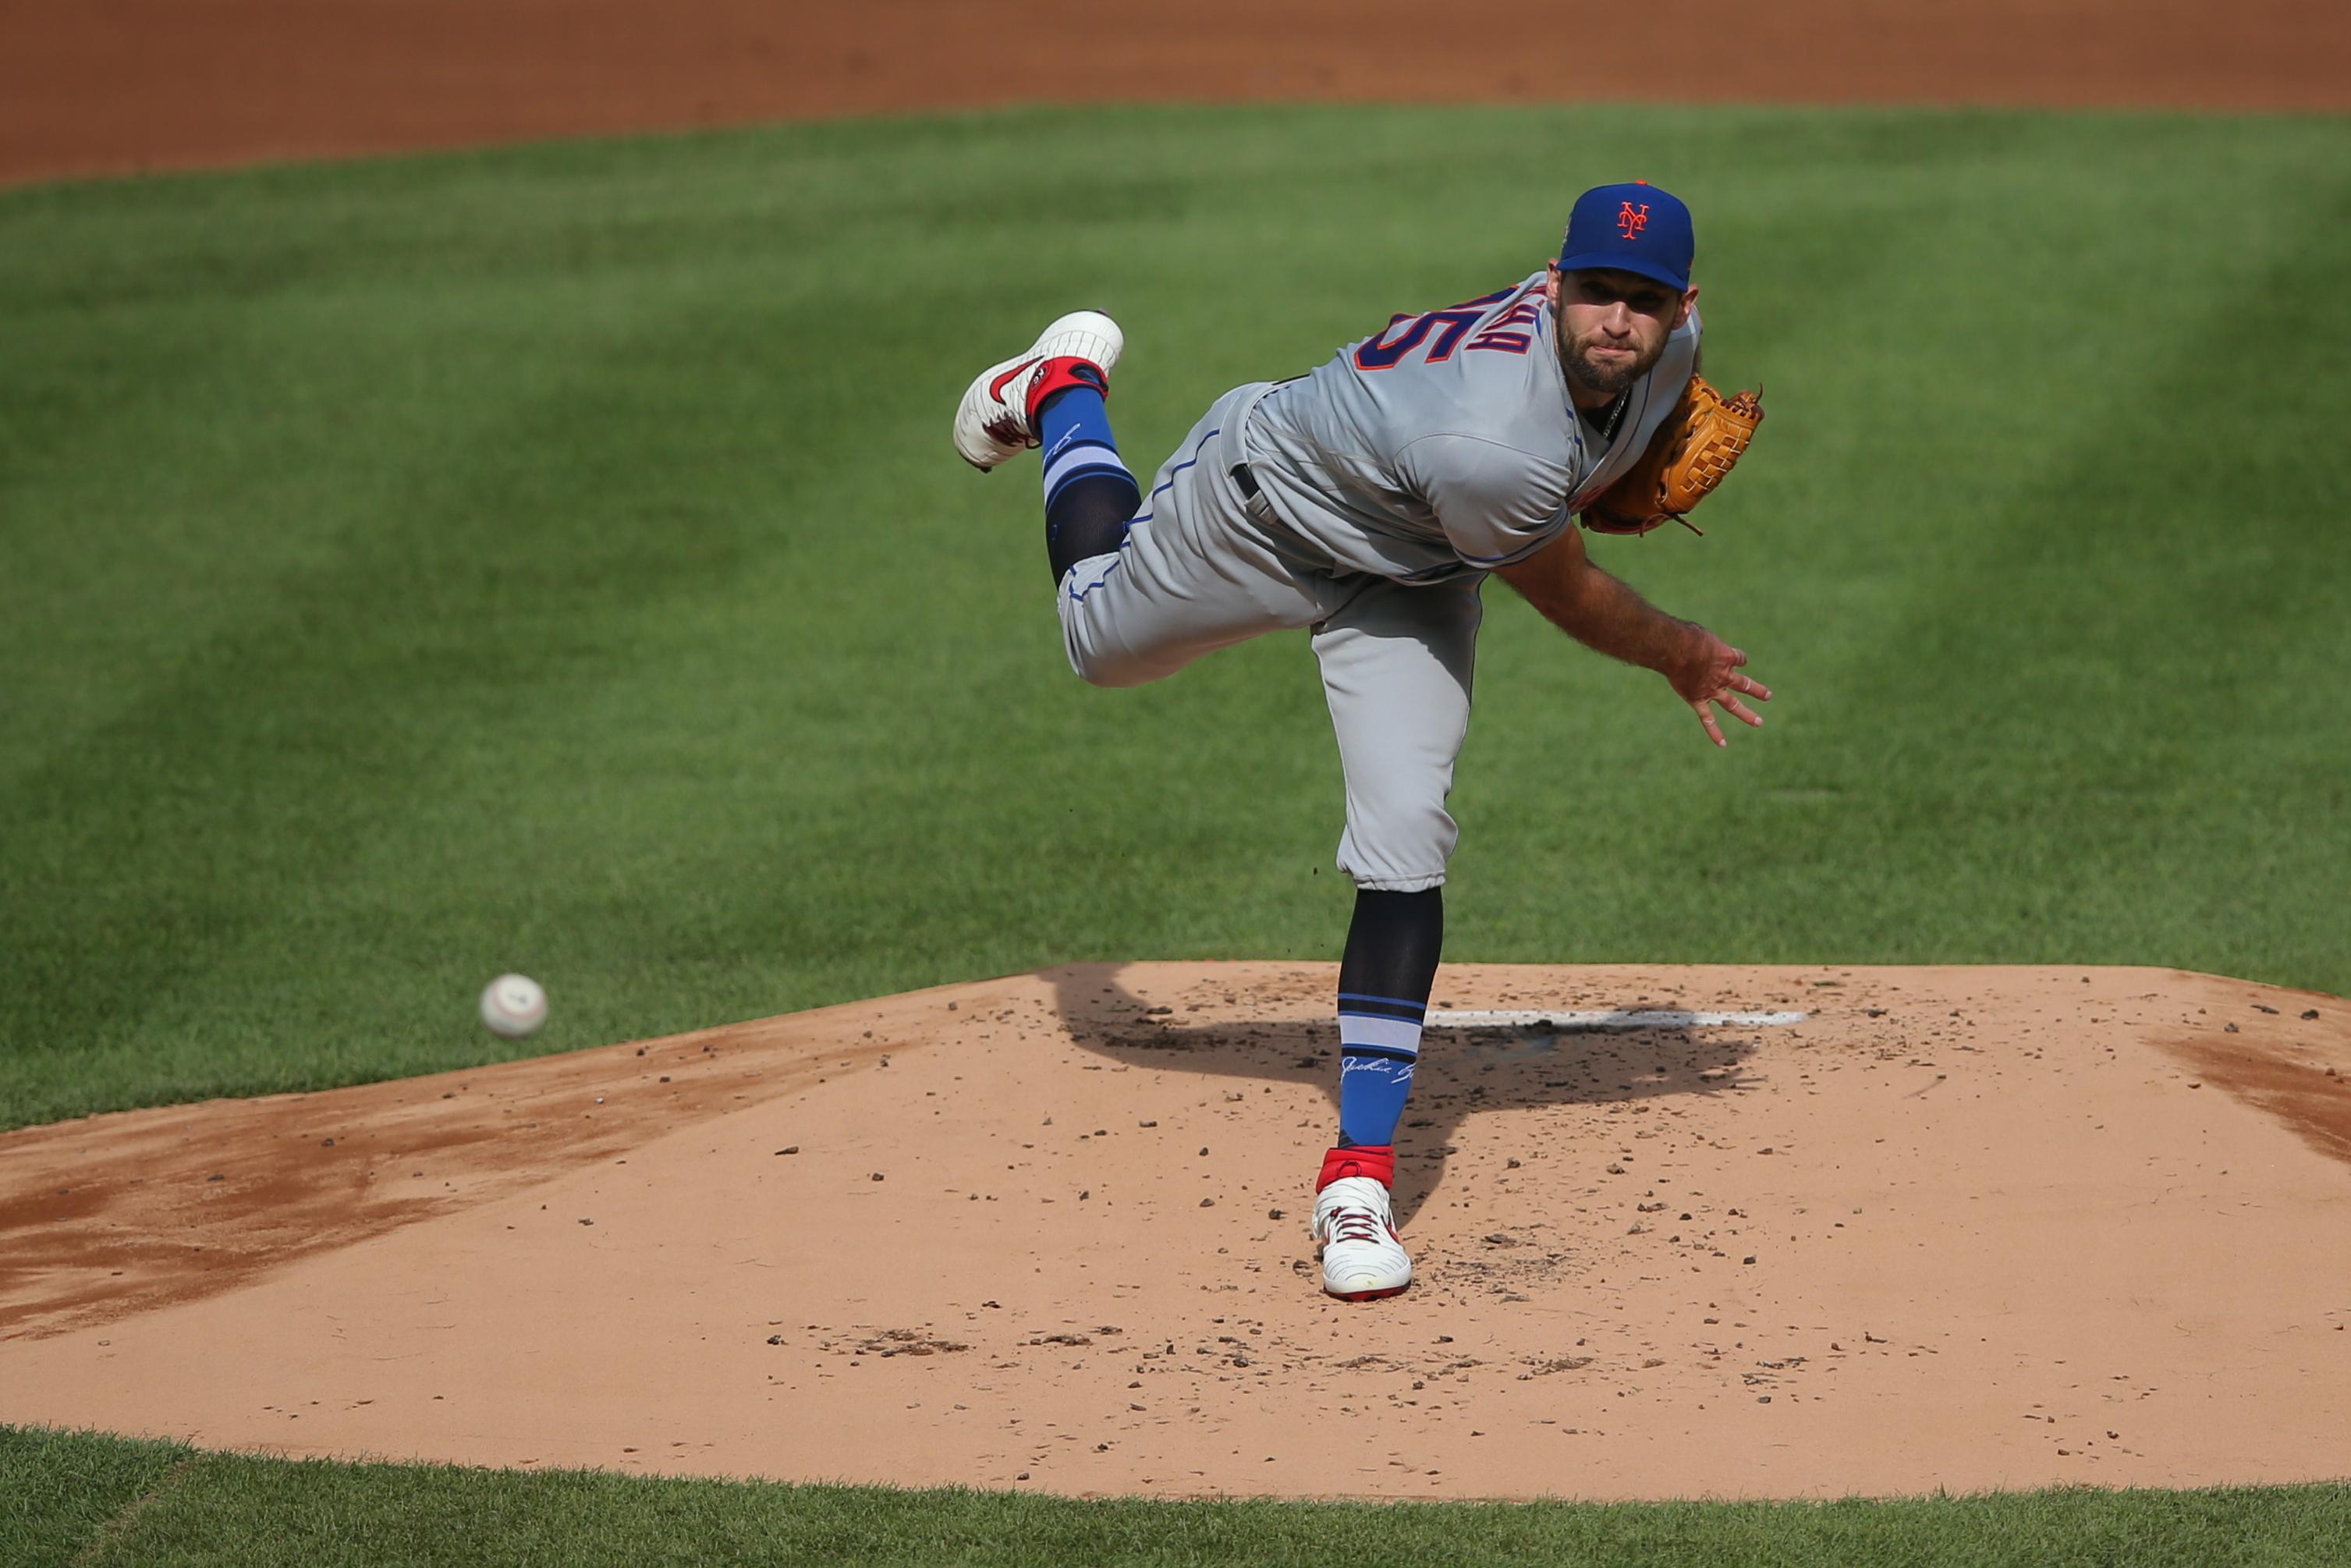 Aug 28, 2020; Bronx, New York, USA; New York Mets starting pitcher Michael Wacha (45) pitches against the New York Yankees during the first inning of the first game of a double header at Yankee Stadium. Mandatory Credit: Brad Penner-USA TODAY Sports / © Brad Penner-USA TODAY Sports